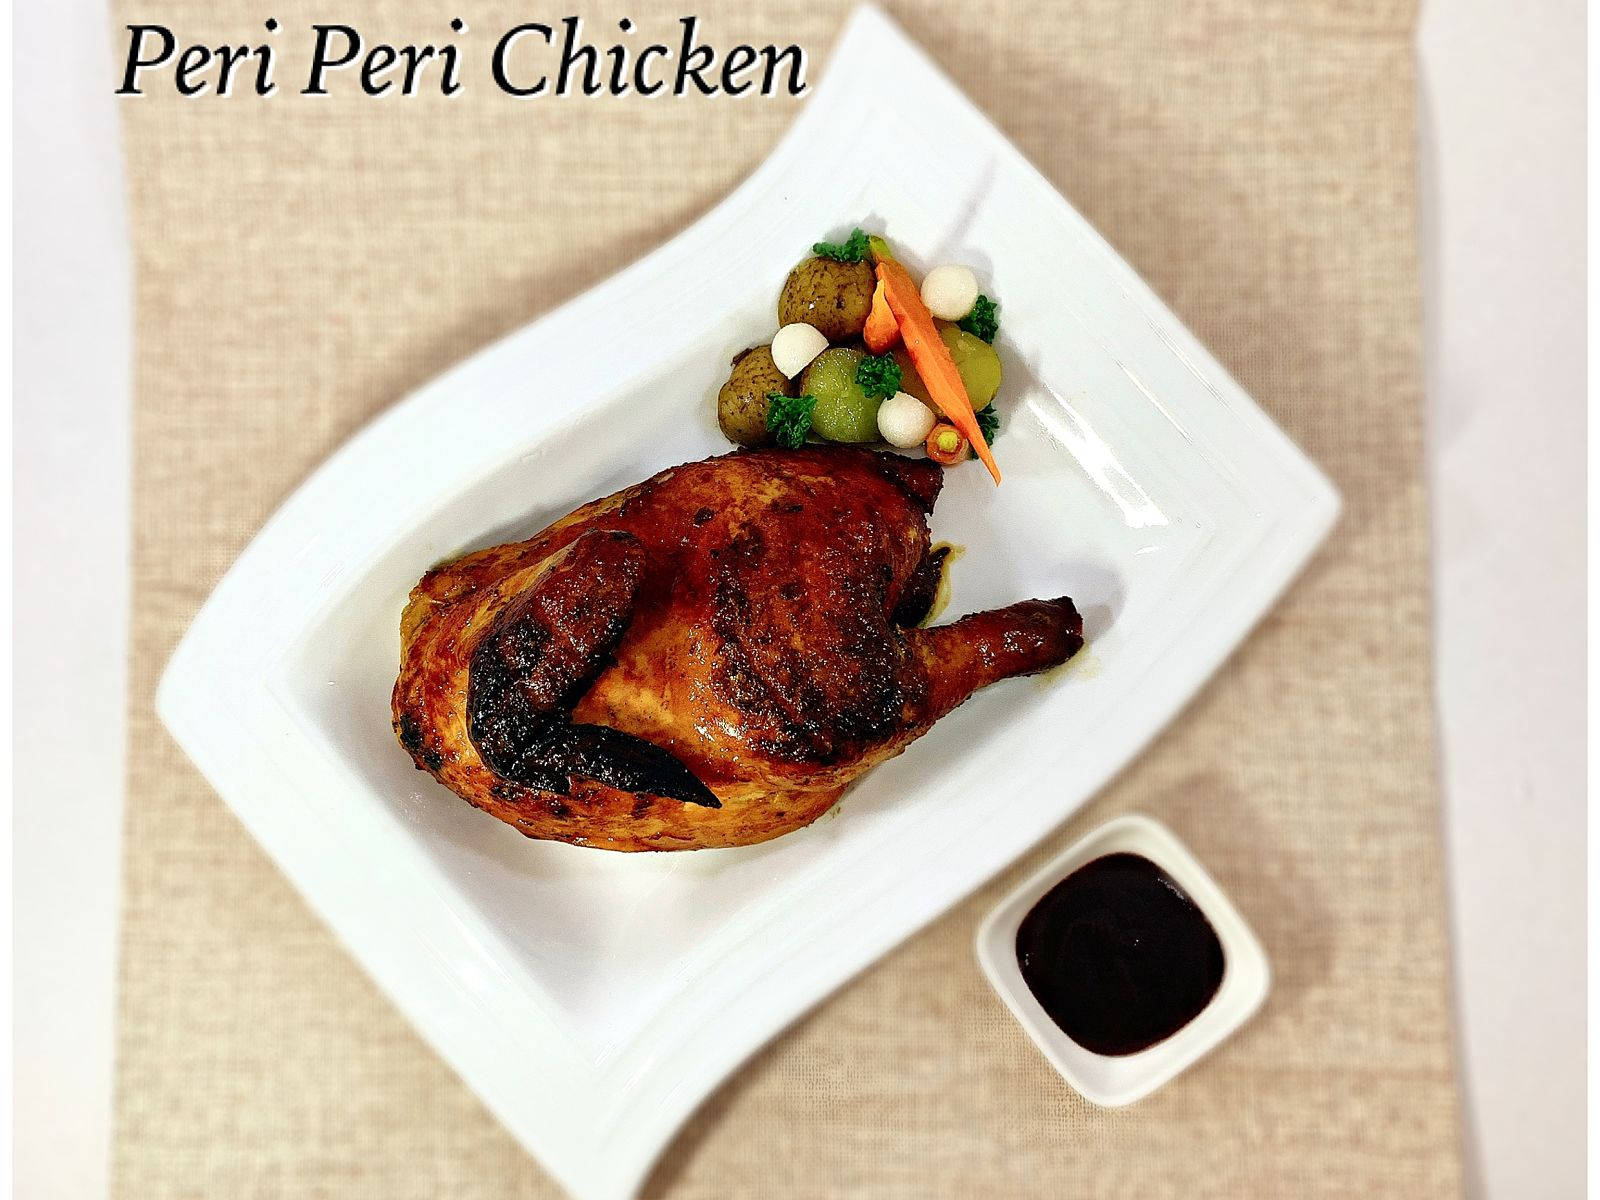 Sizzling Grilled Peri Peri Chicken Experience Wallpaper